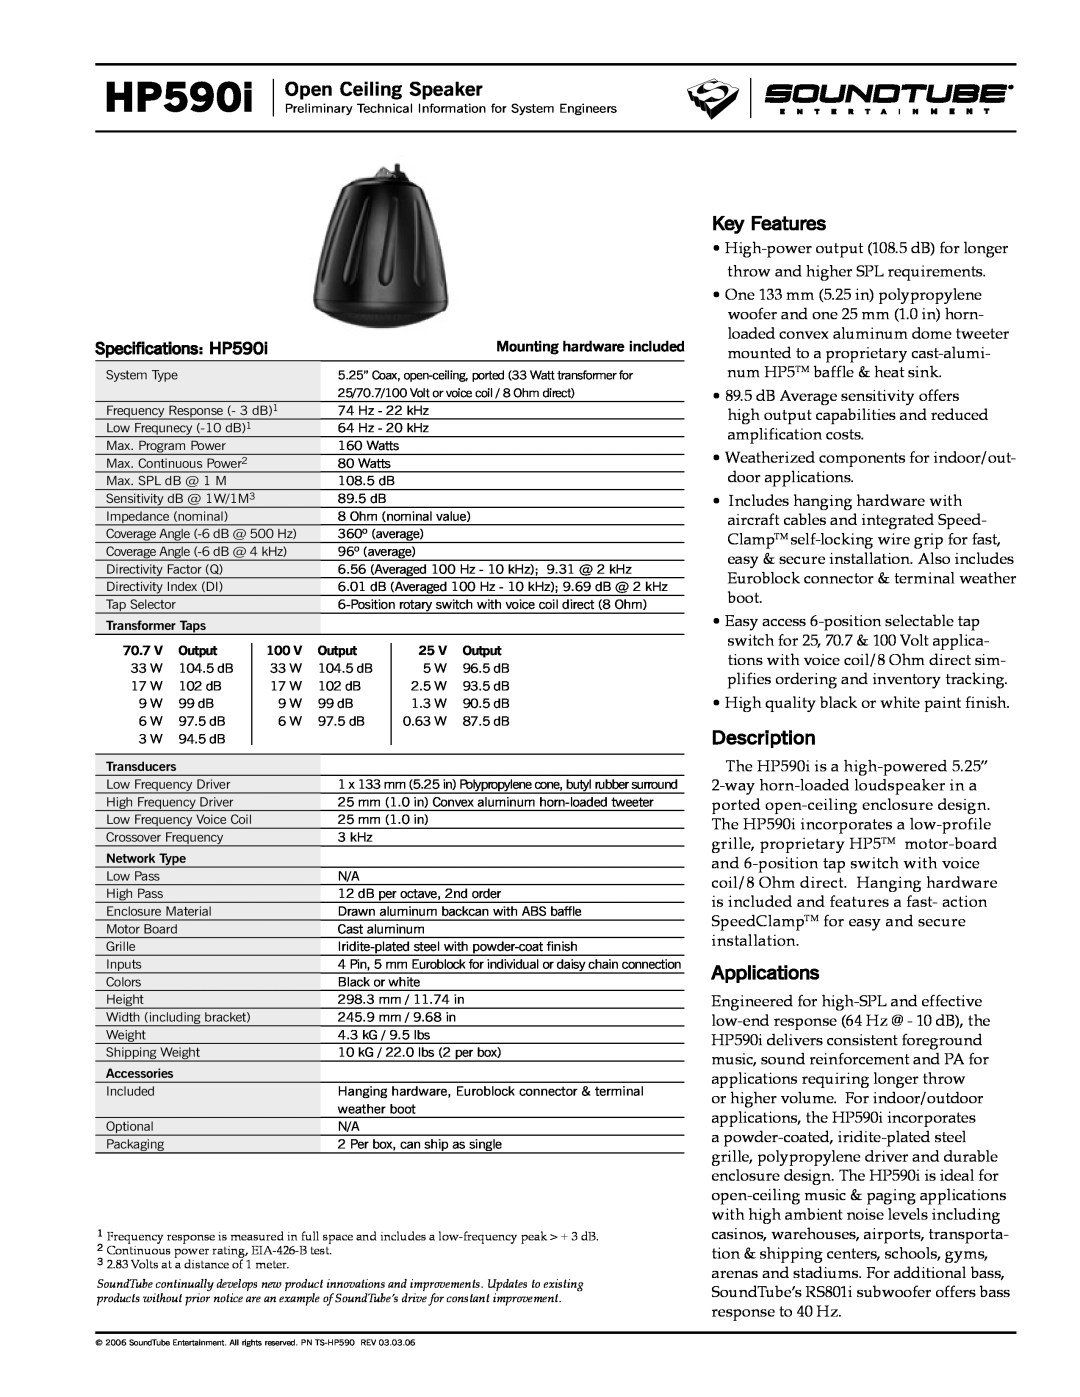 Phase Technology HP590i specifications Open Ceiling Speaker, Key Features, Description, Applications 